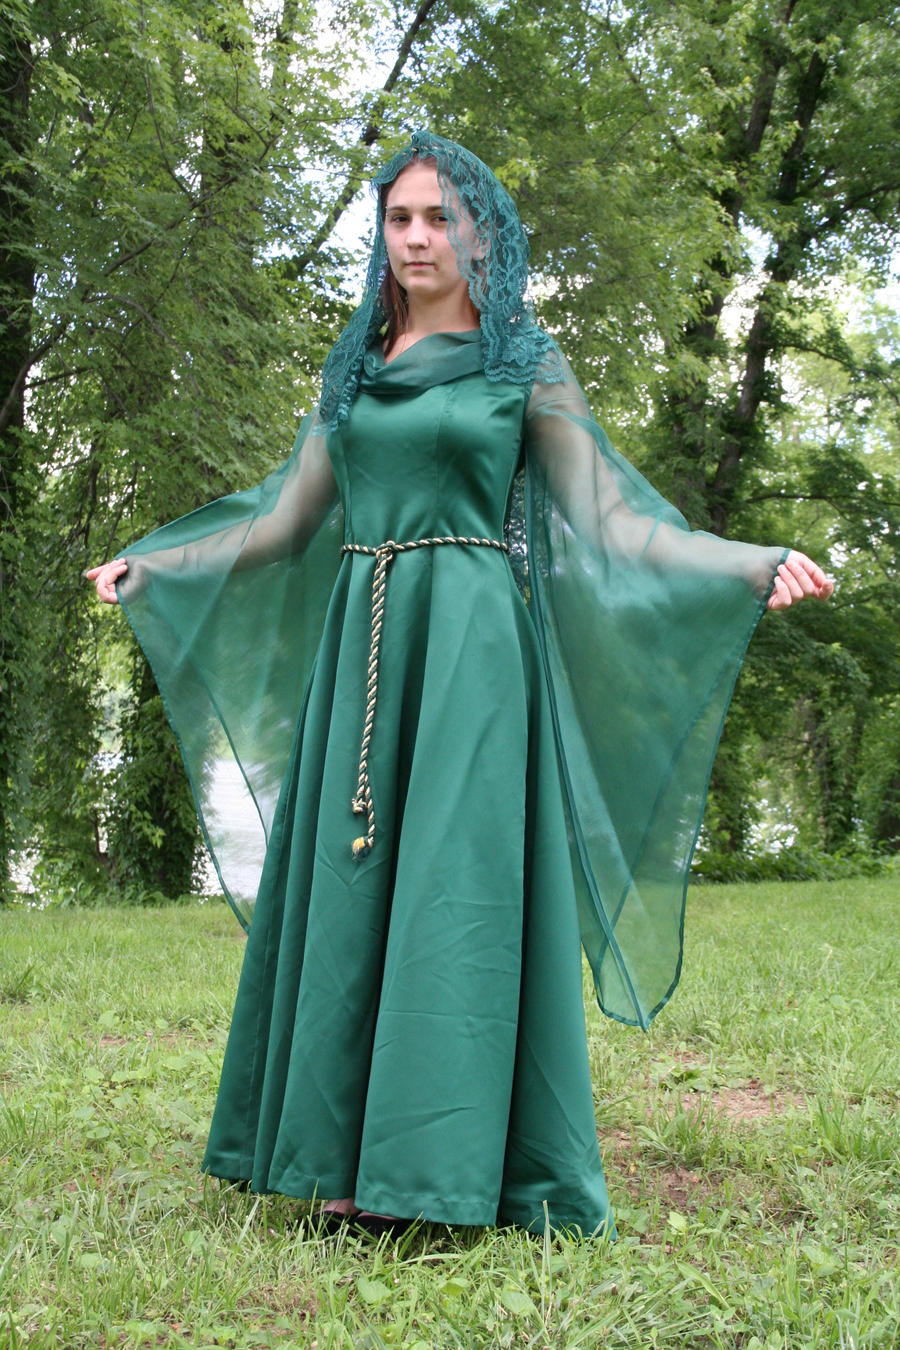 An introduction to the clothing of the middle ages